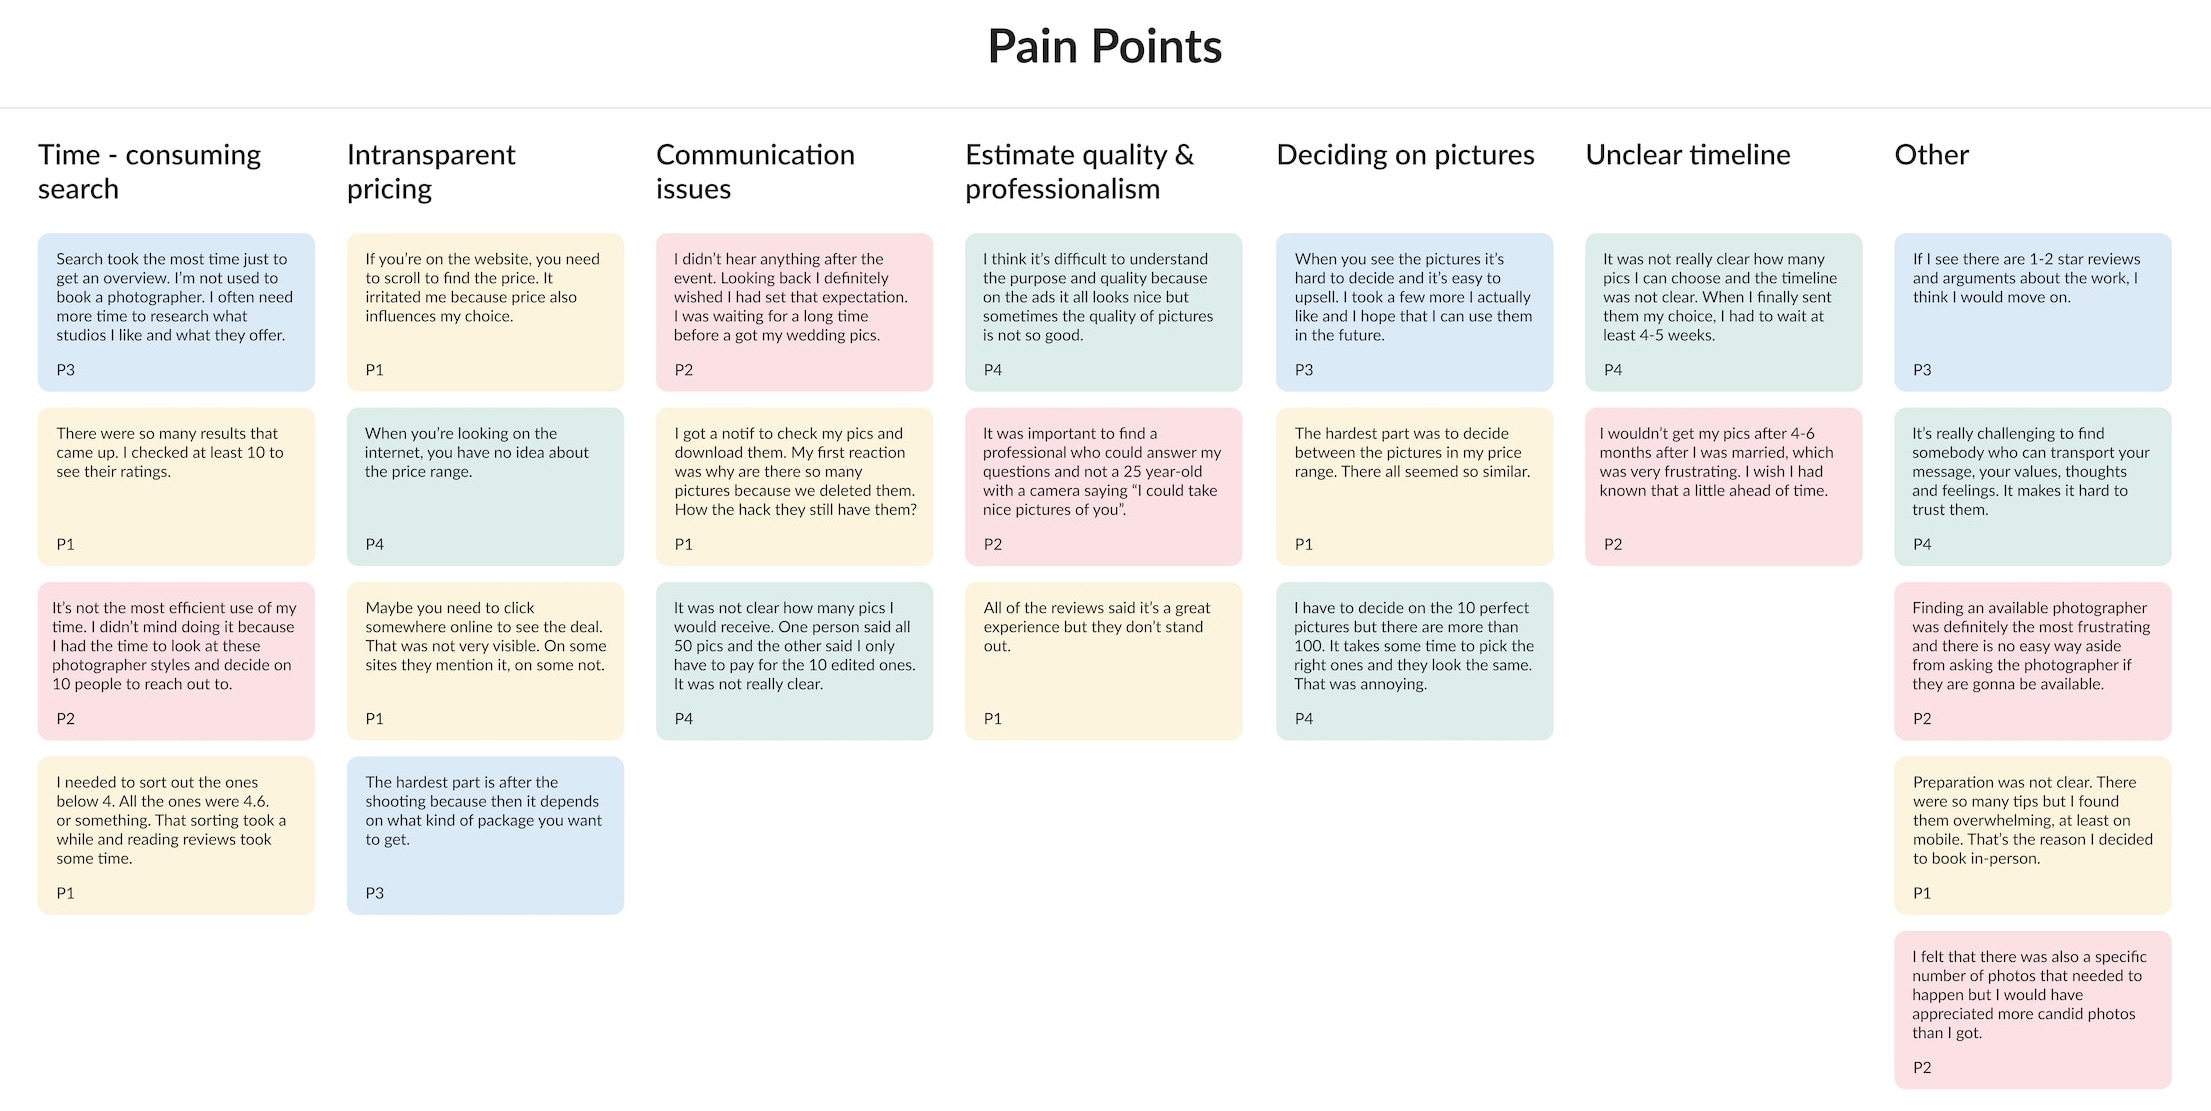 Cluster pain points